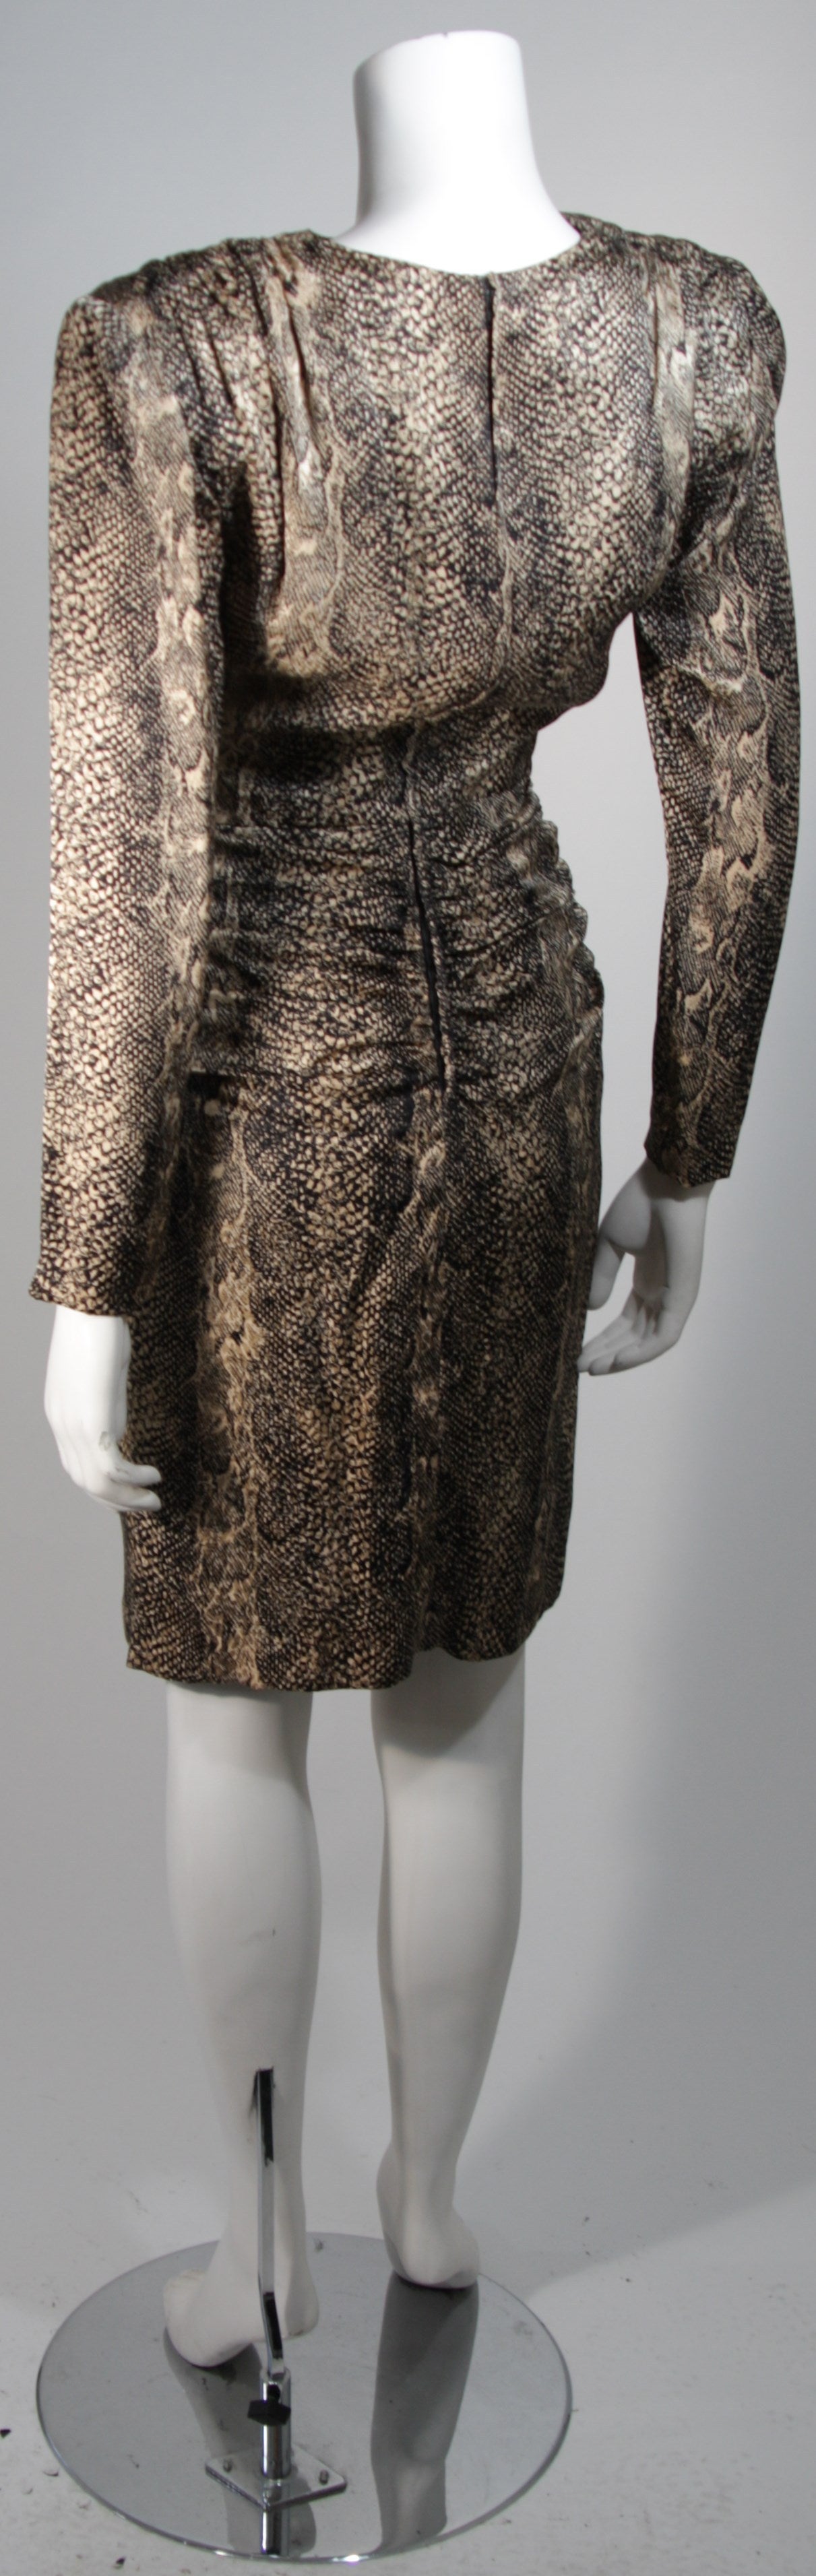 Vicky Tiel Silk Snakeskin Cocktail Dress with Draping Size Small 3